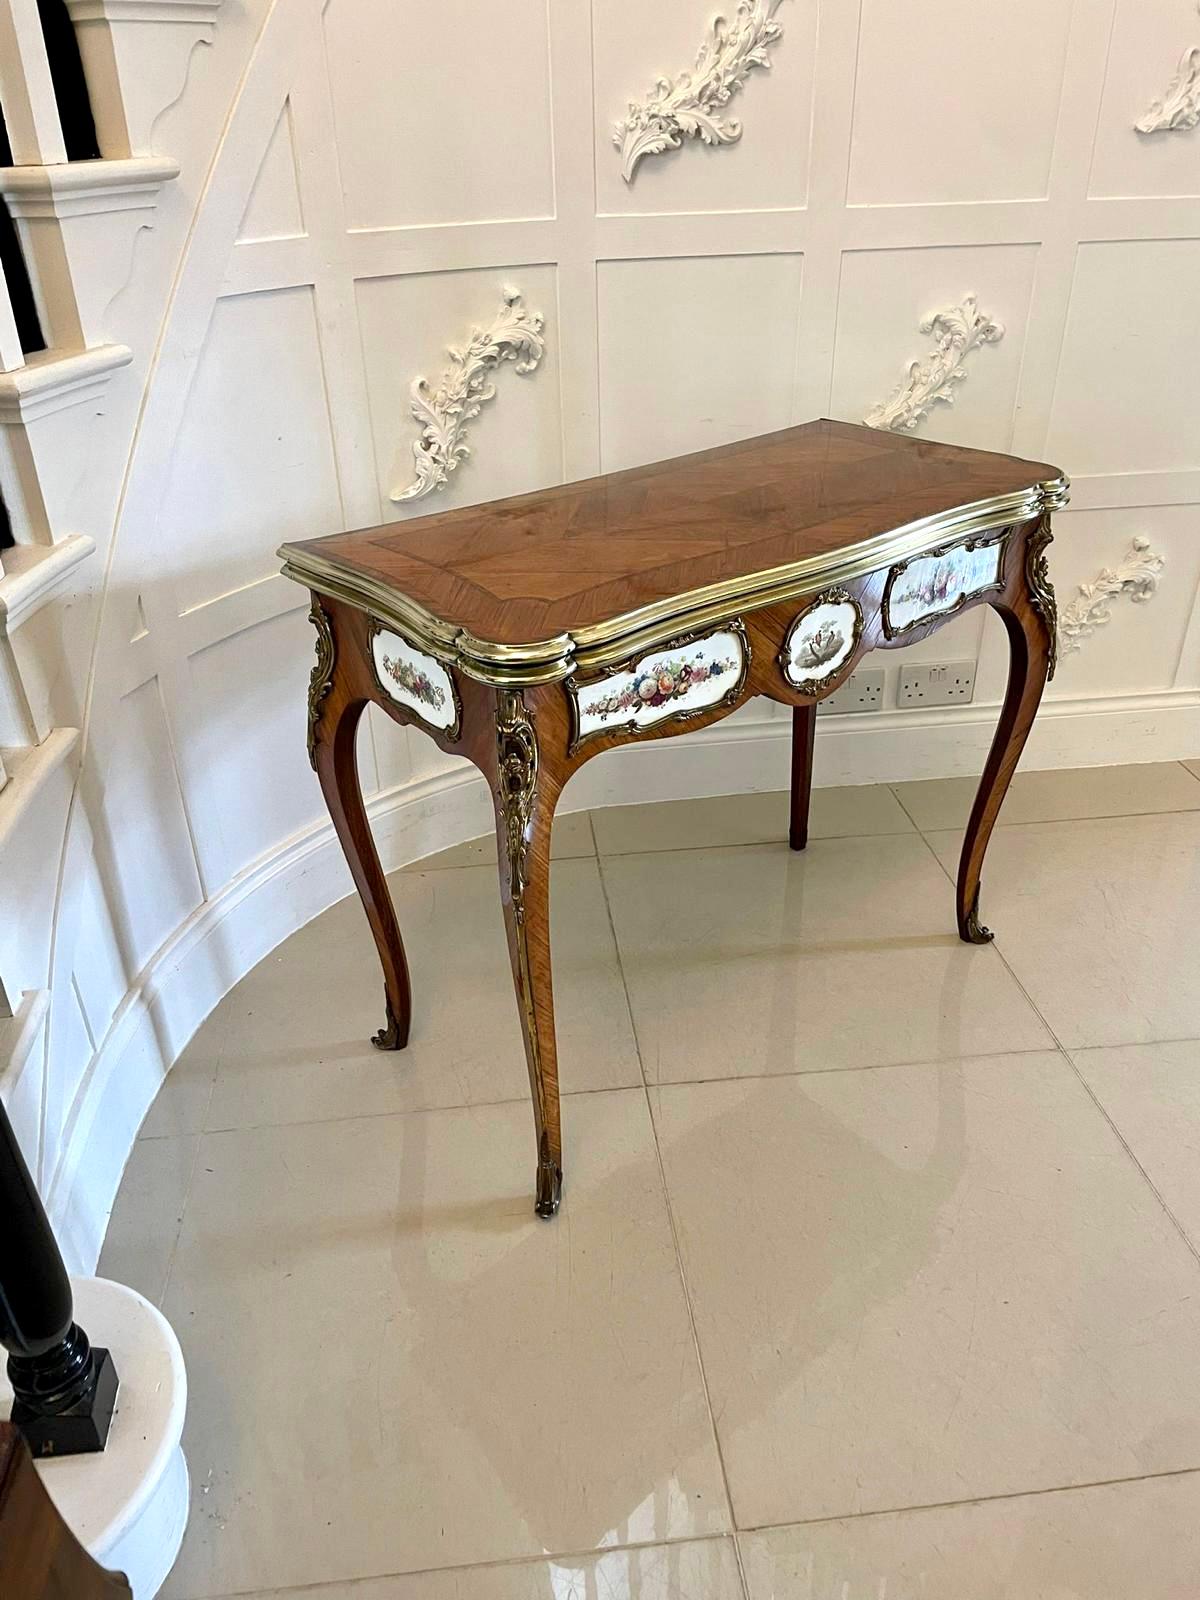 Outstanding quality Antique Victorian porcelain and ormolu mounted kingwood card/console table by G T Morant, Bond Street, London having a beautiful serpentine shaped kingwood crossbanded swizzle top with a brass edge opening to reveal a baize